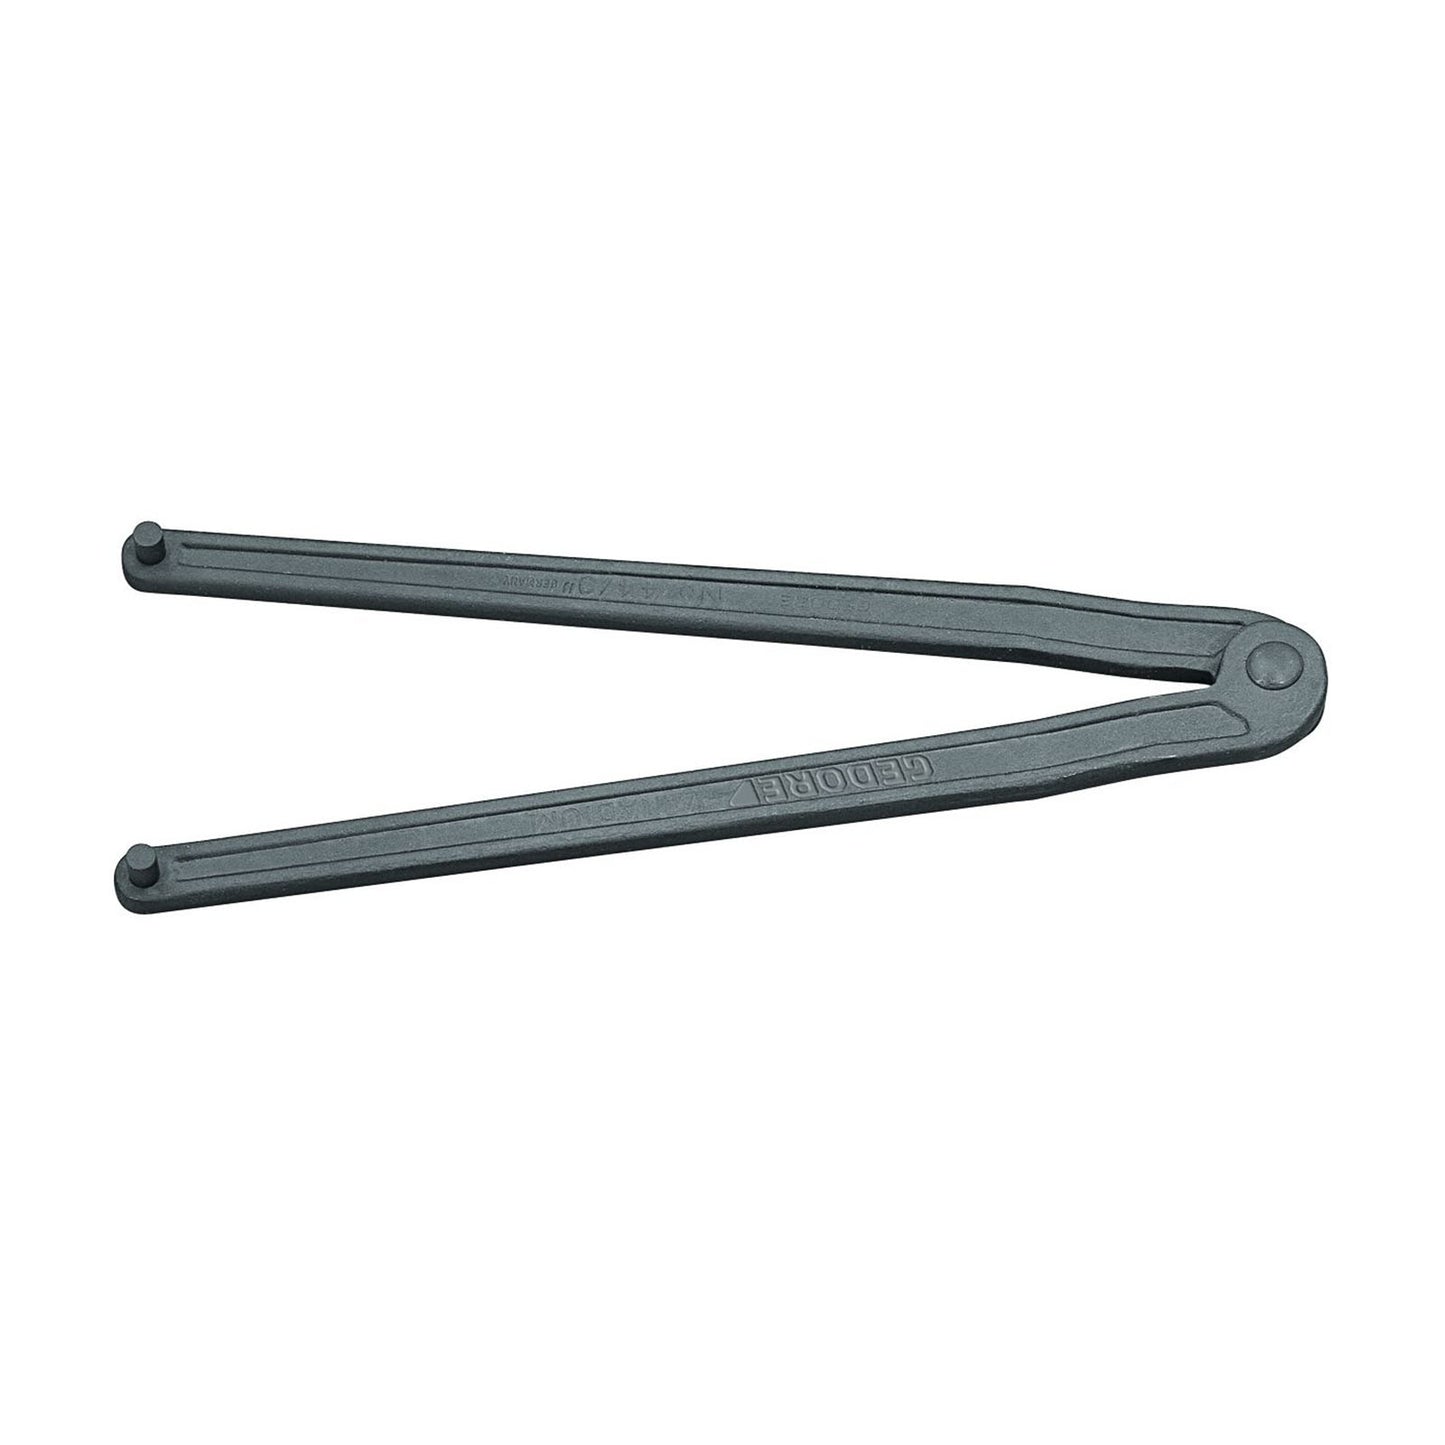 GEDORE 44 6 - Double Pivot Wrench, 6mm (6354720)